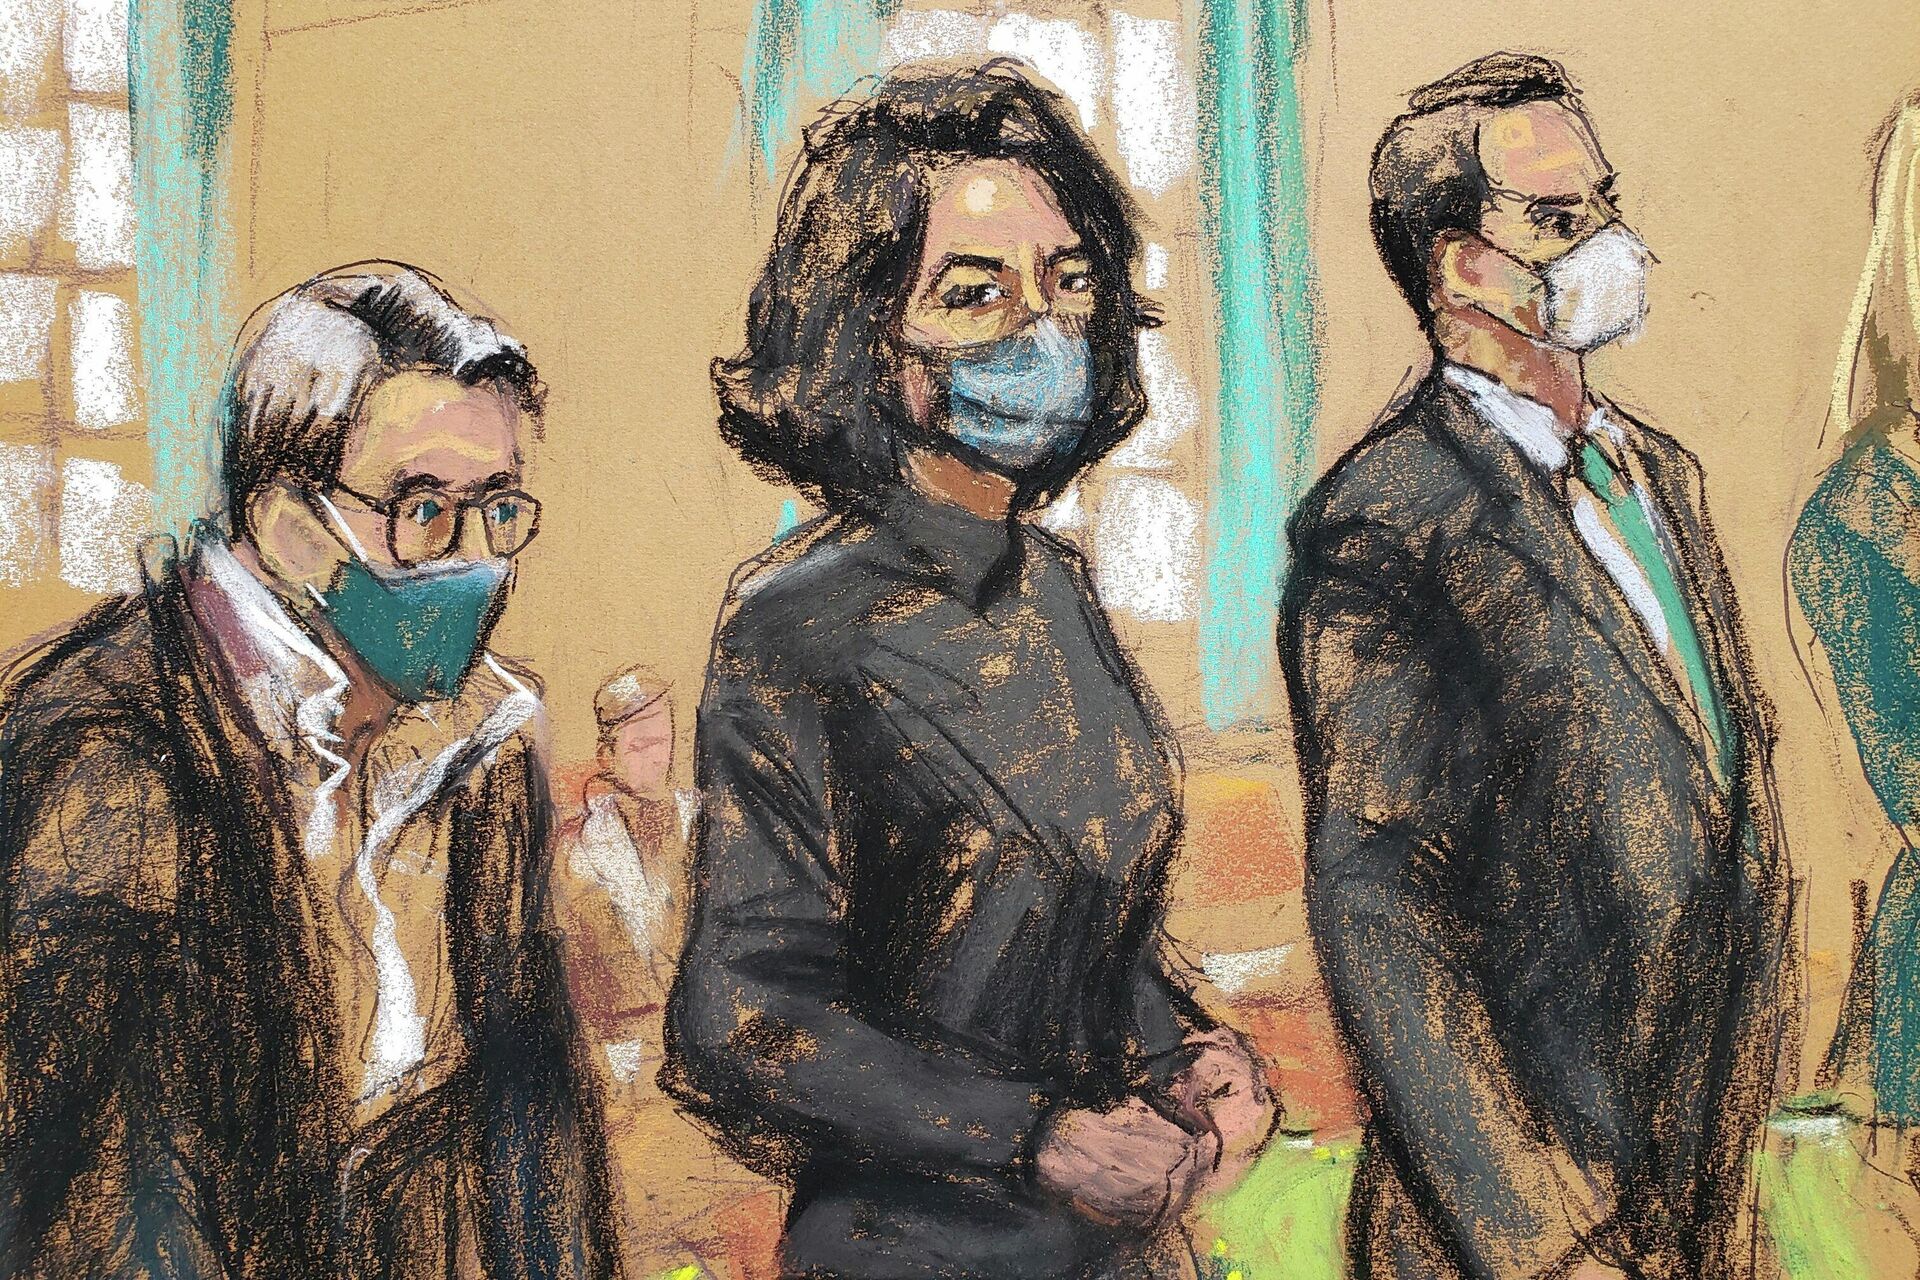 Ghislaine Maxwell, the Jeffrey Epstein associate accused of sex trafficking, stands before U.S. District Judge Alison J. Nathan with her defense team of Bobbi Sternheim and Christian Everdell during a pre-trial hearing ahead of jury selection, in a courtroom sketch in New York City, U.S., November 15, 2021 - Sputnik International, 1920, 16.12.2021